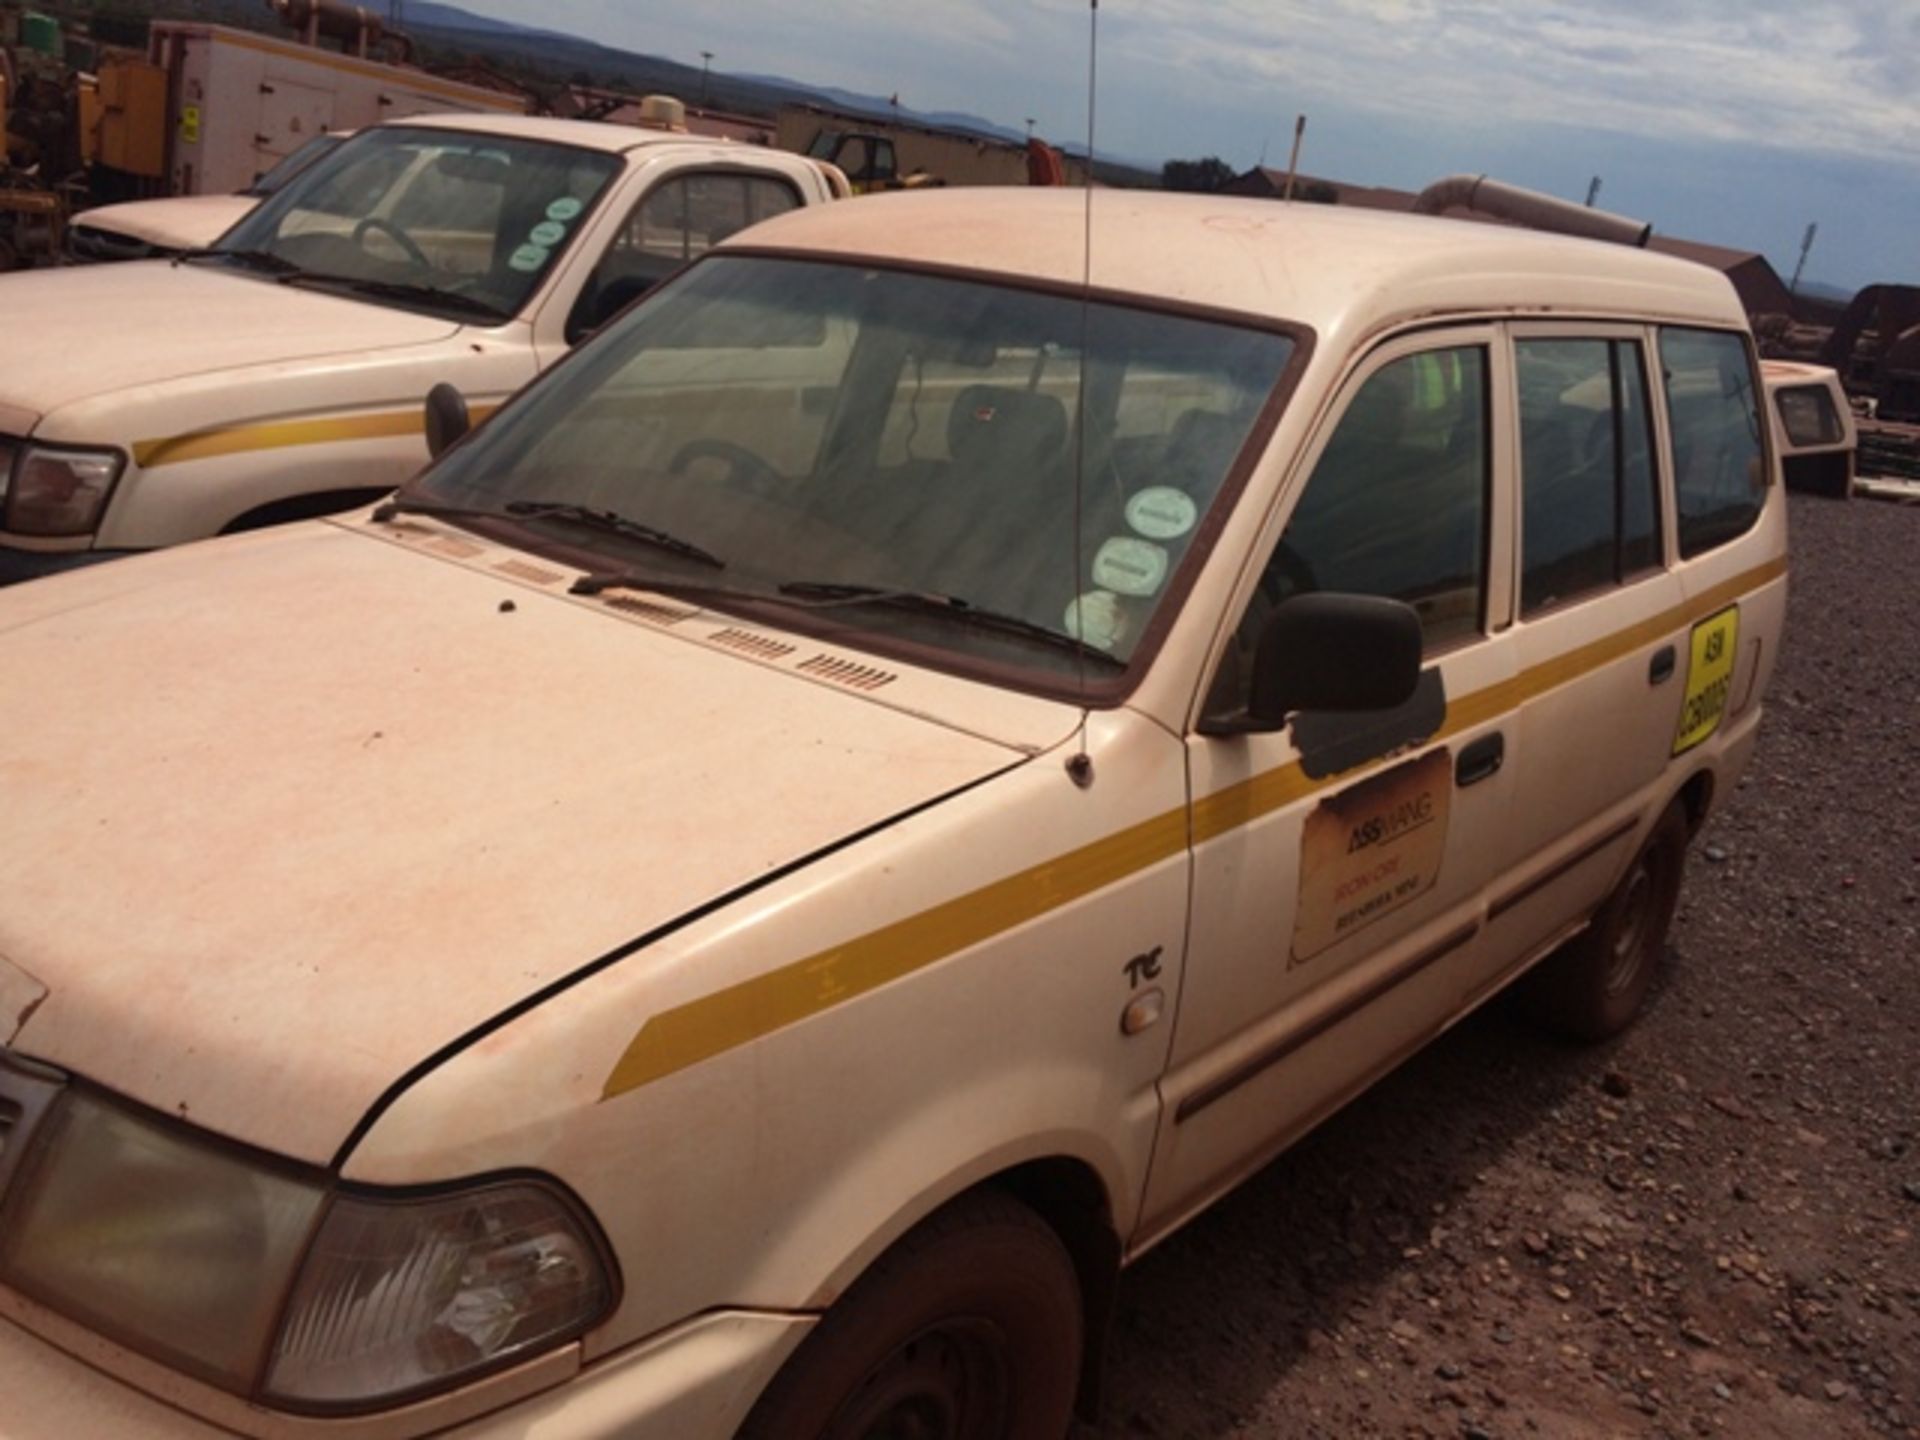 2003TOYOTA CONDOR3000D EST TE328413KM DEREG.NO DOC FEE (BEESHOEK)STICKERS TO REMOVED BEFORE DISPATCH - Image 7 of 9